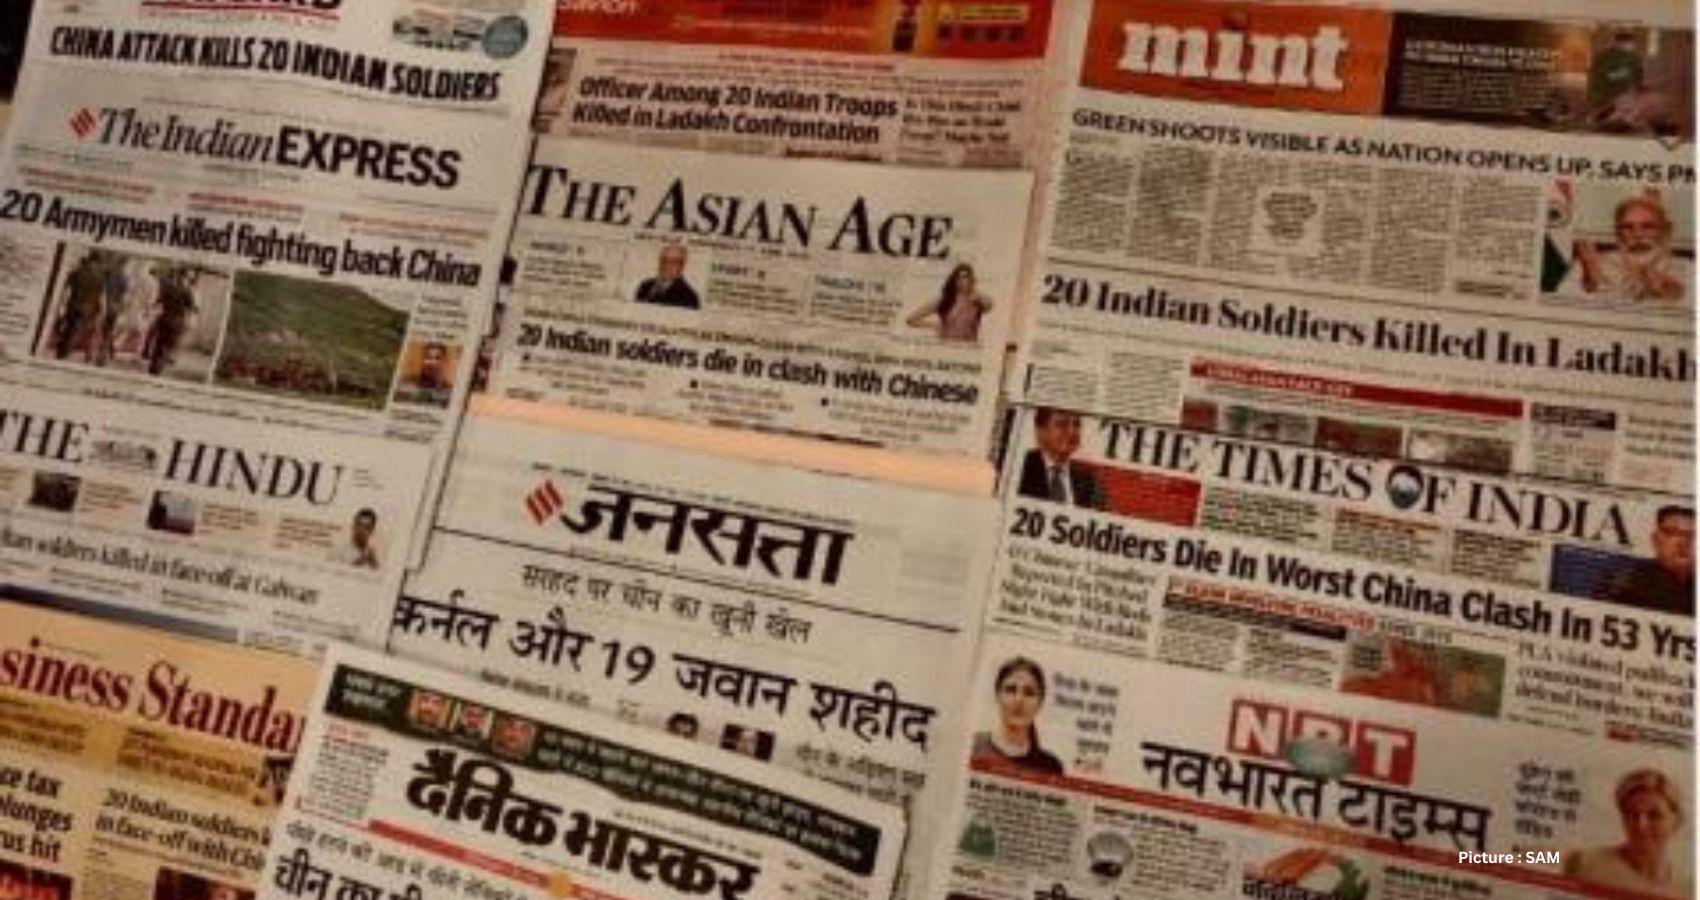 Nationalism A Dominant Frame In Global Media Narratives; India Is No Exception